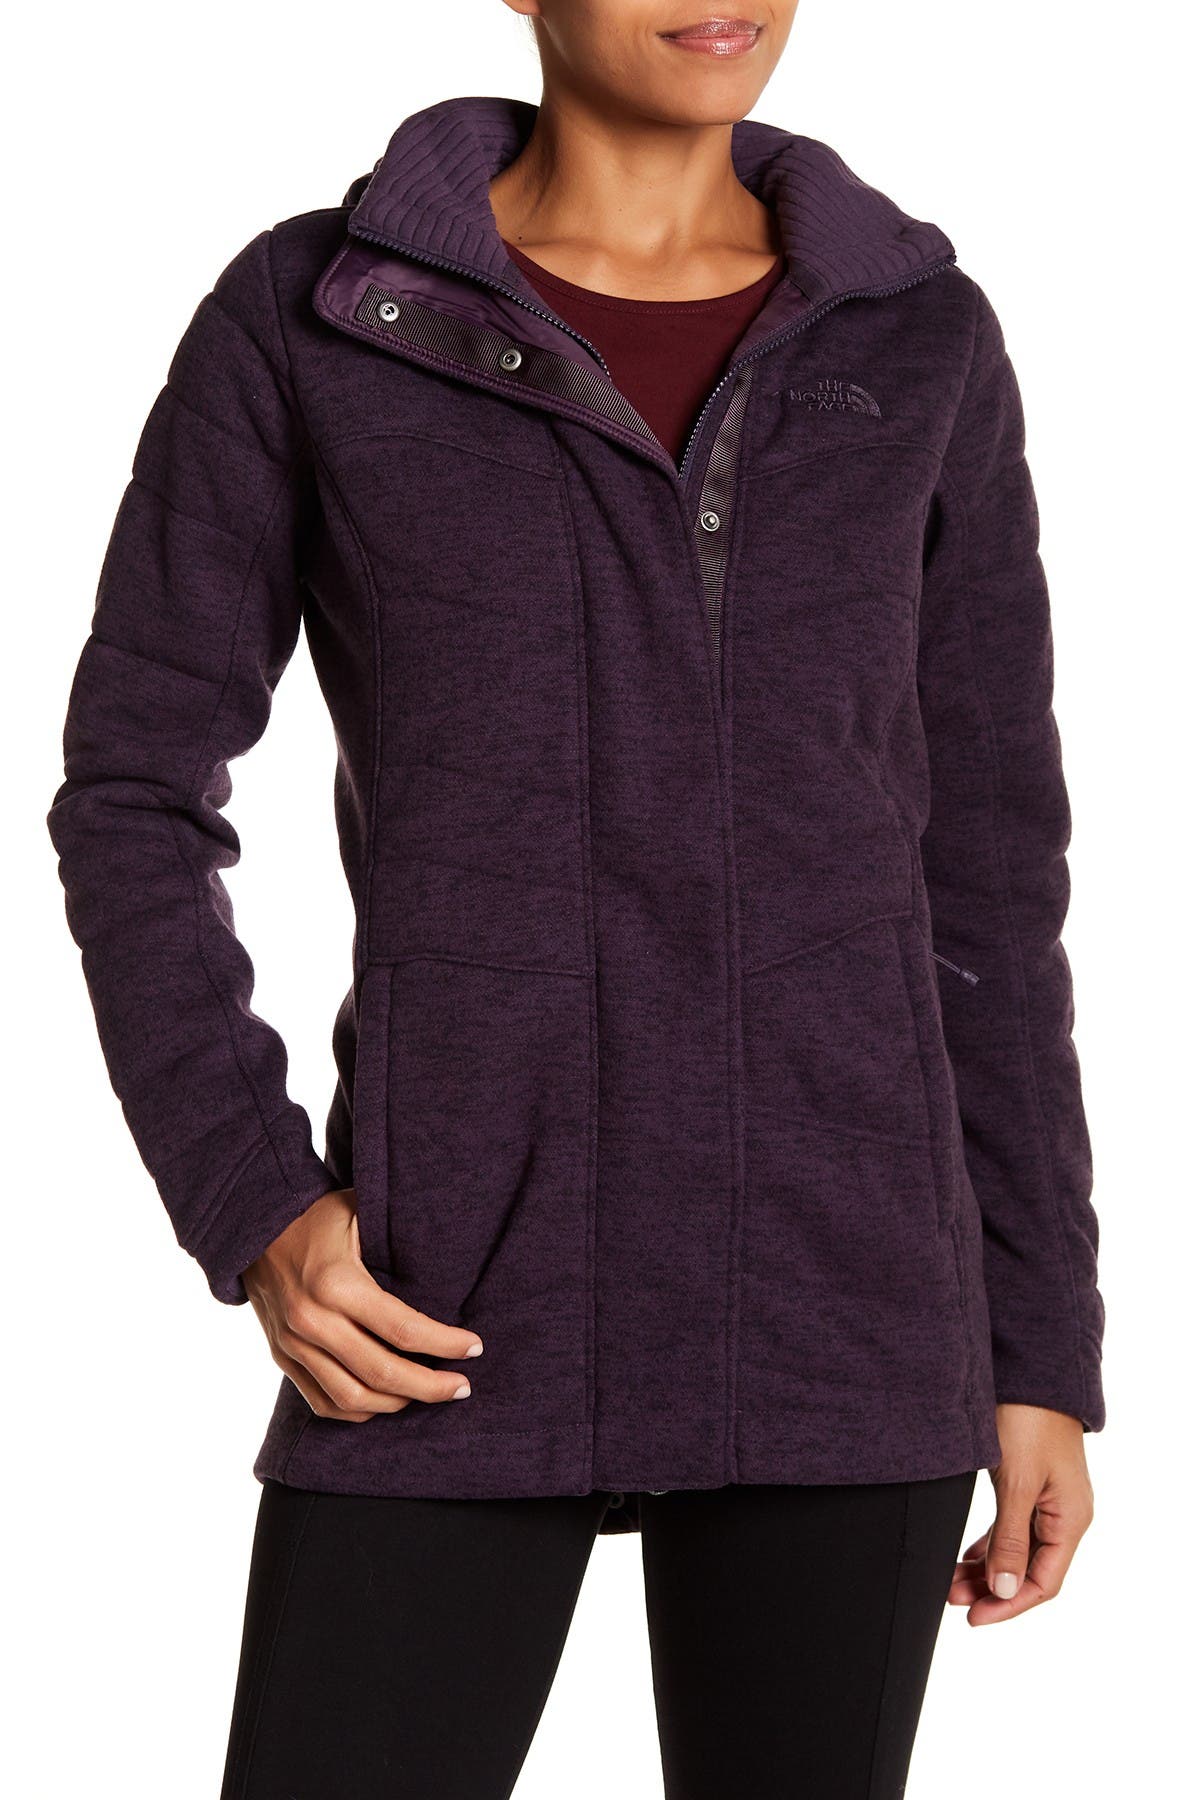 north face indi insulated hoodie jacket